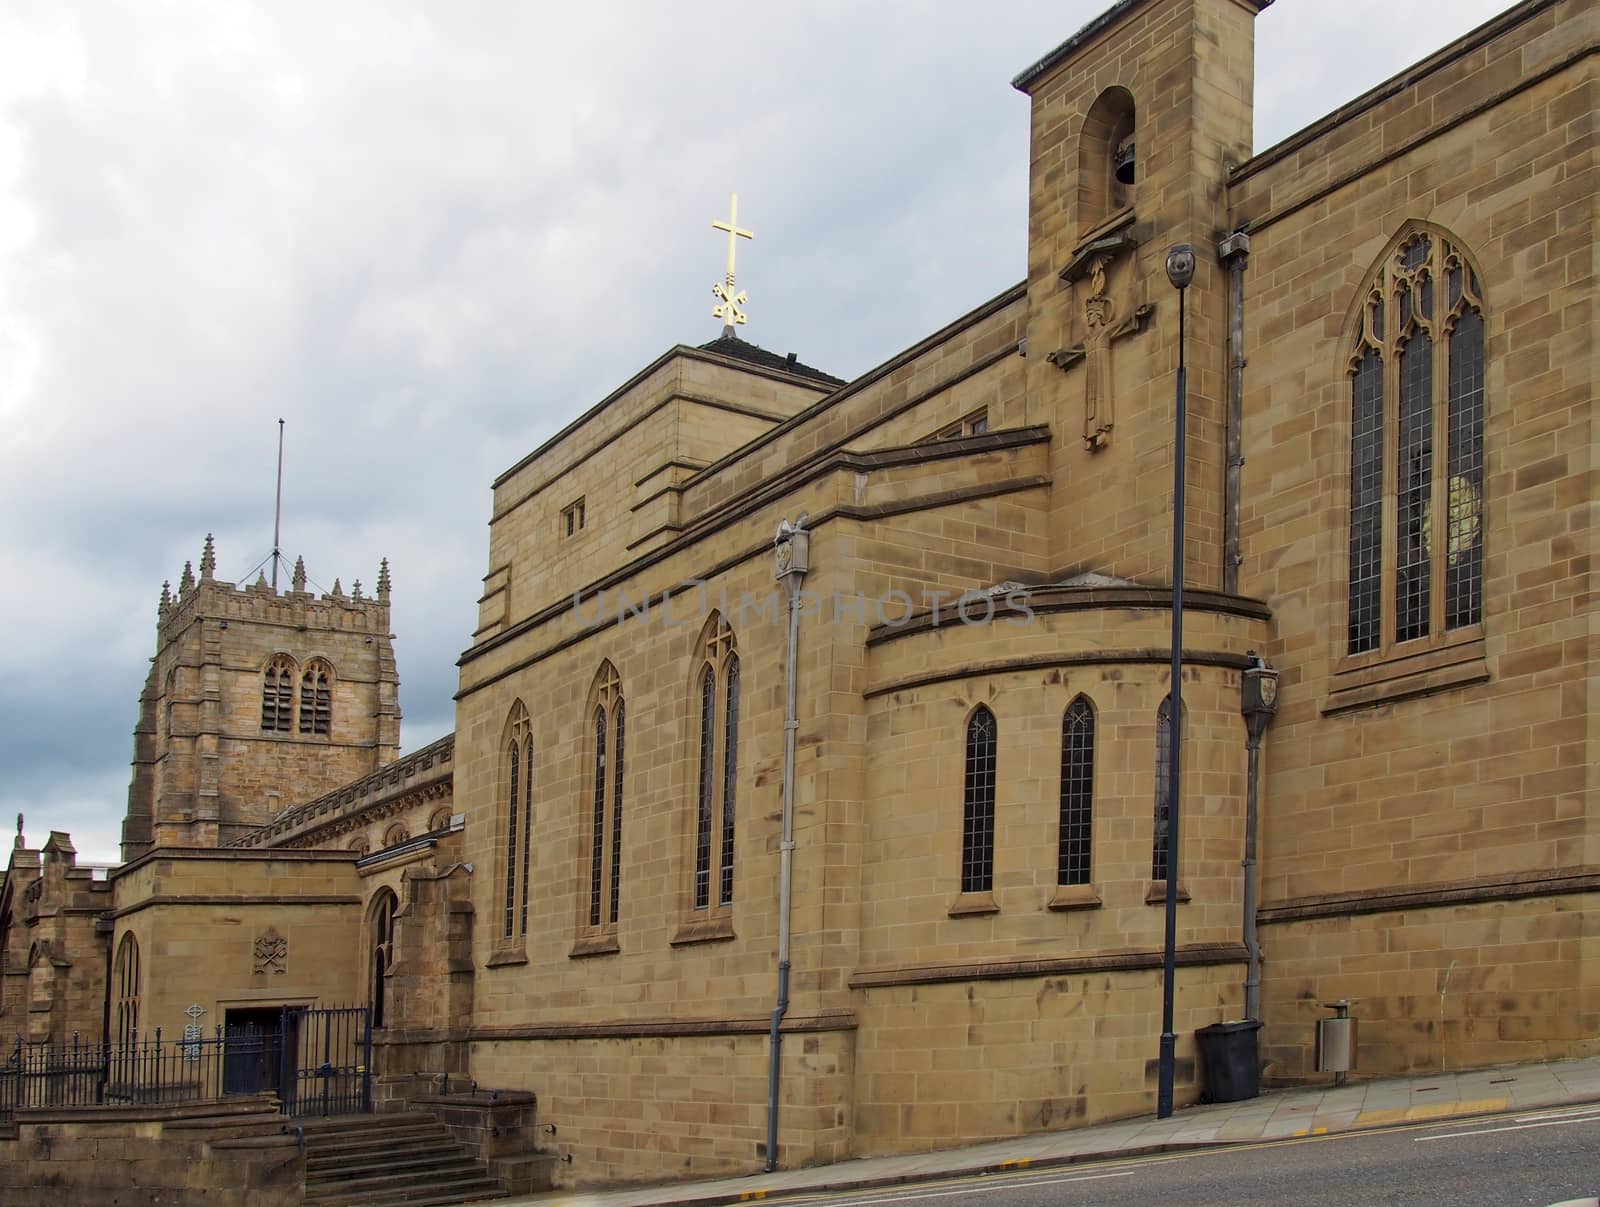 a view of the medieval church of bradford cathedral in west yorkshire with main building and entrance from the street